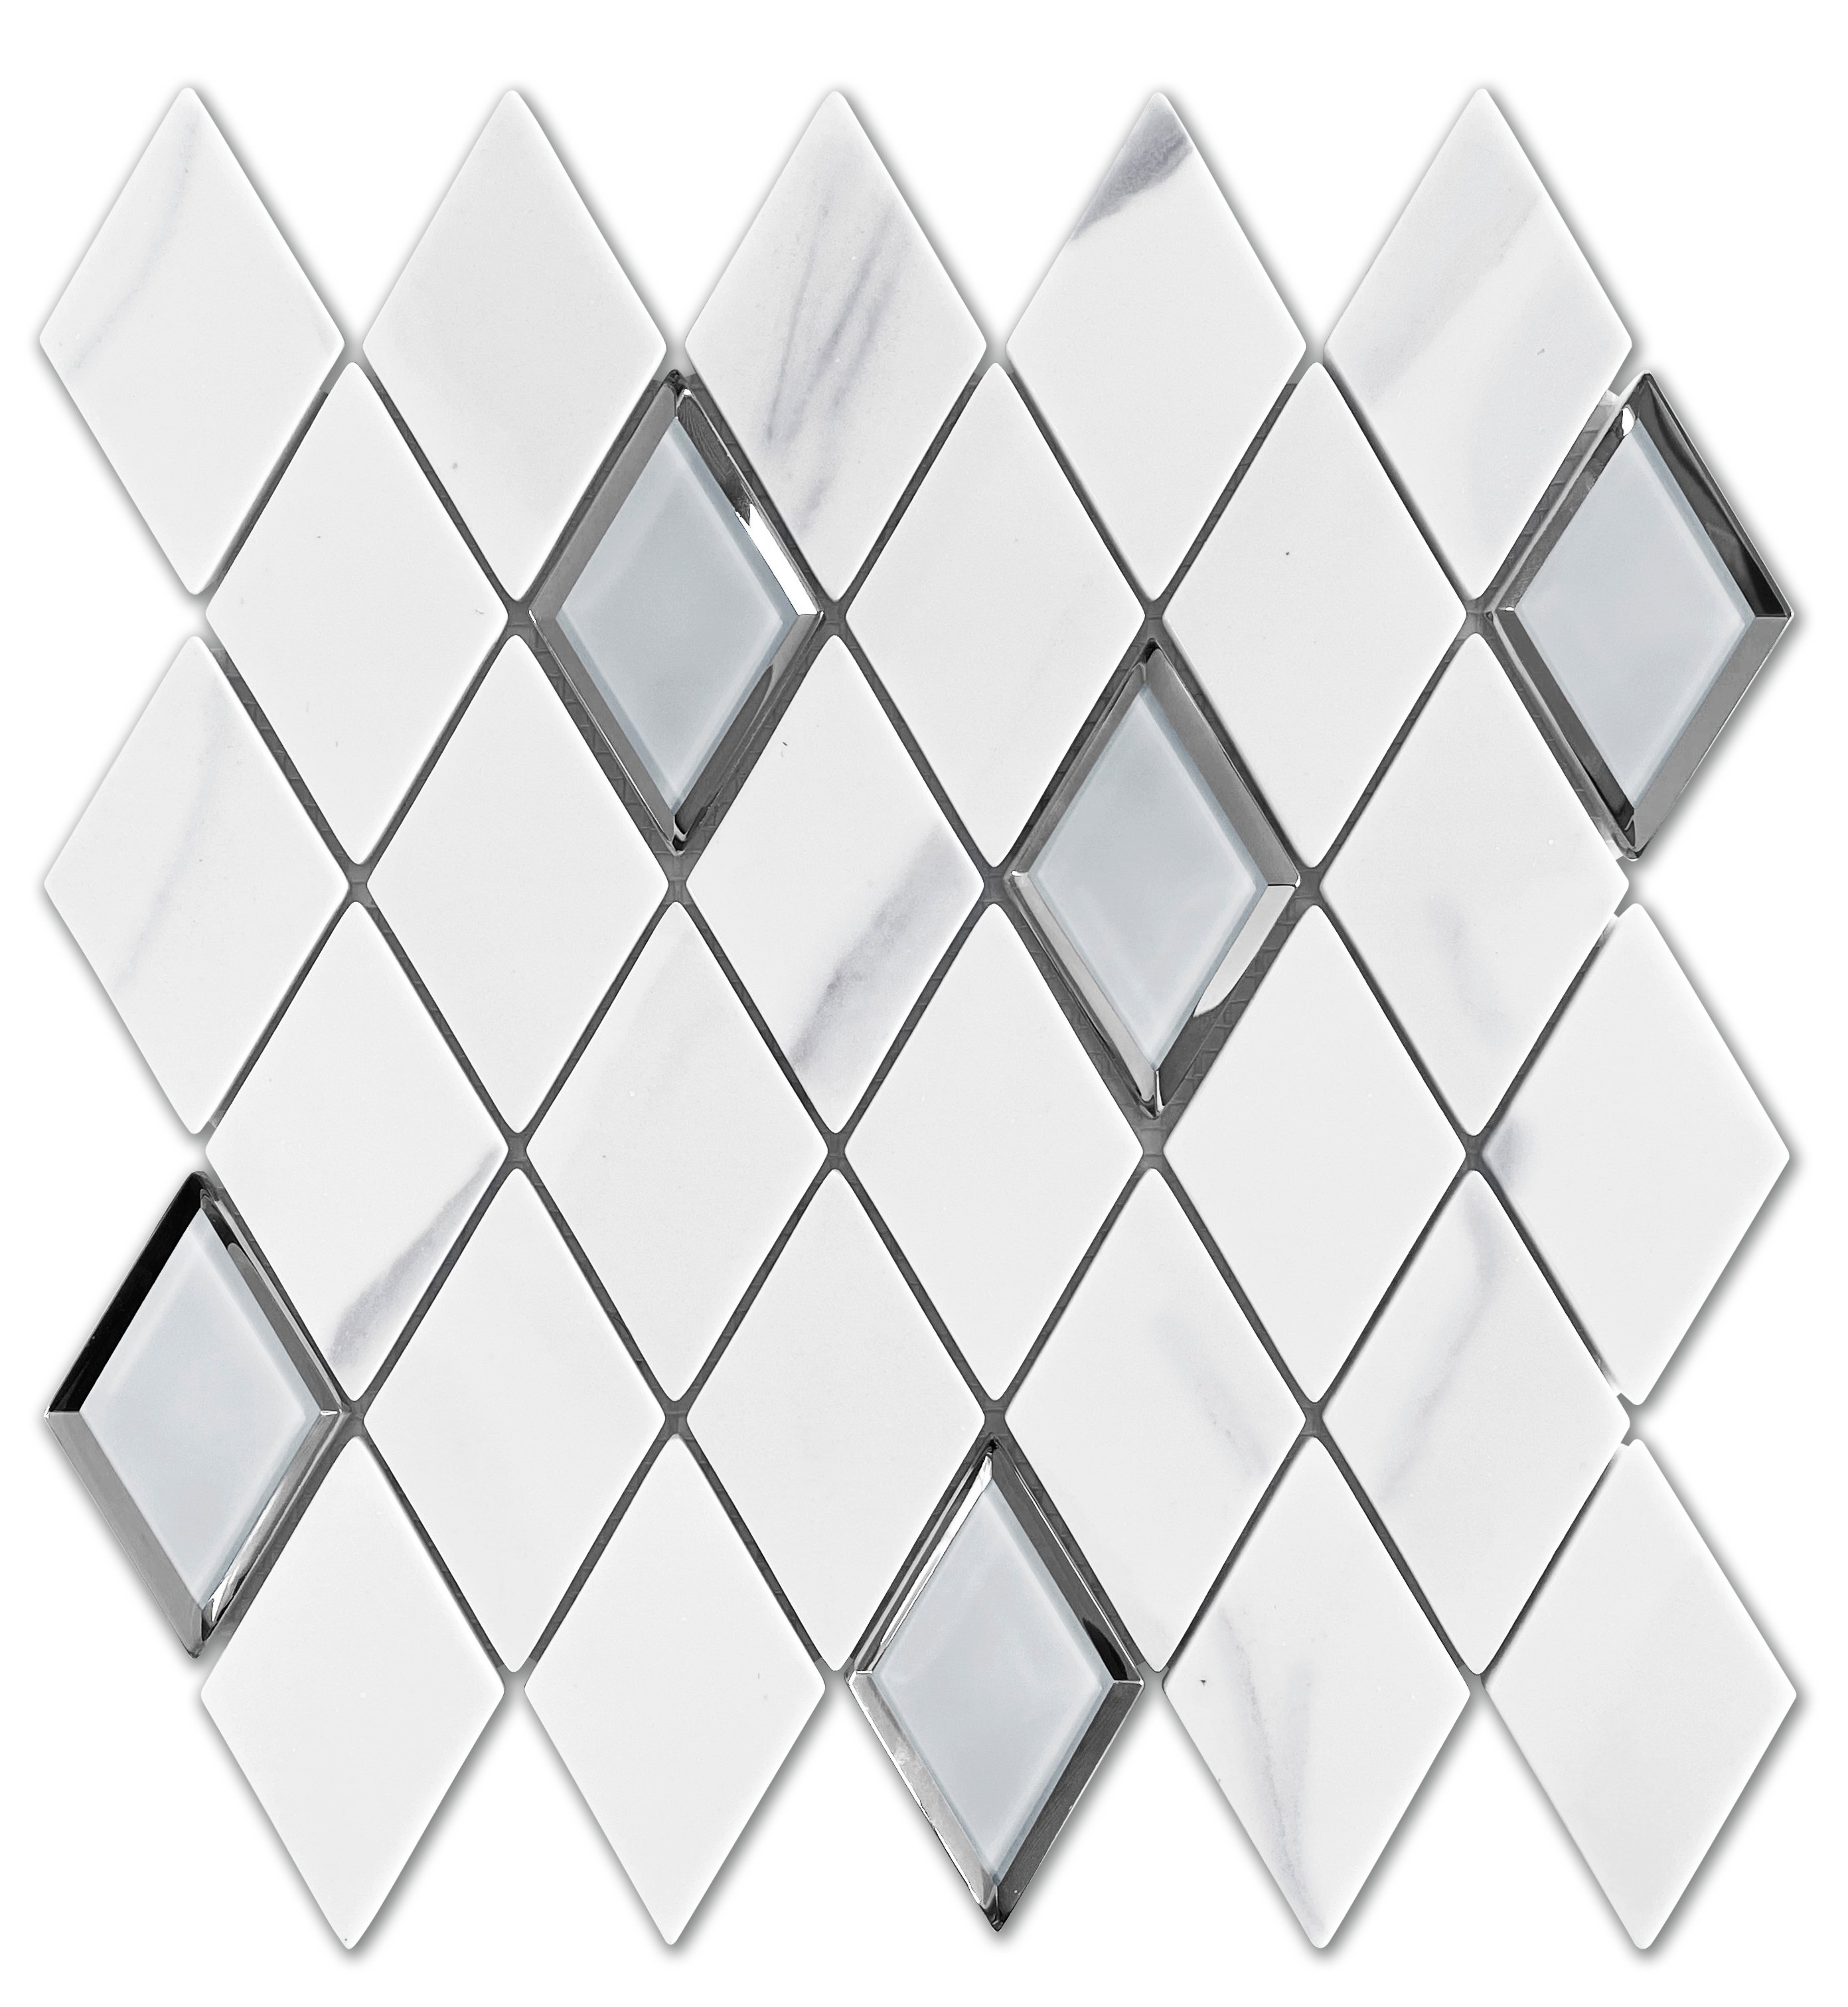 Emser L'AMOUR White Diamond  recycled glass mosaic tile W83LAMOWH1212MDI is an Emser tile product. Emser tile L'amour mosaic tile is made of recycled glass.   Emser Tile L'amour mosaics comes in picket, diamond, leaf, triad, kaleidoscope, and offset.   